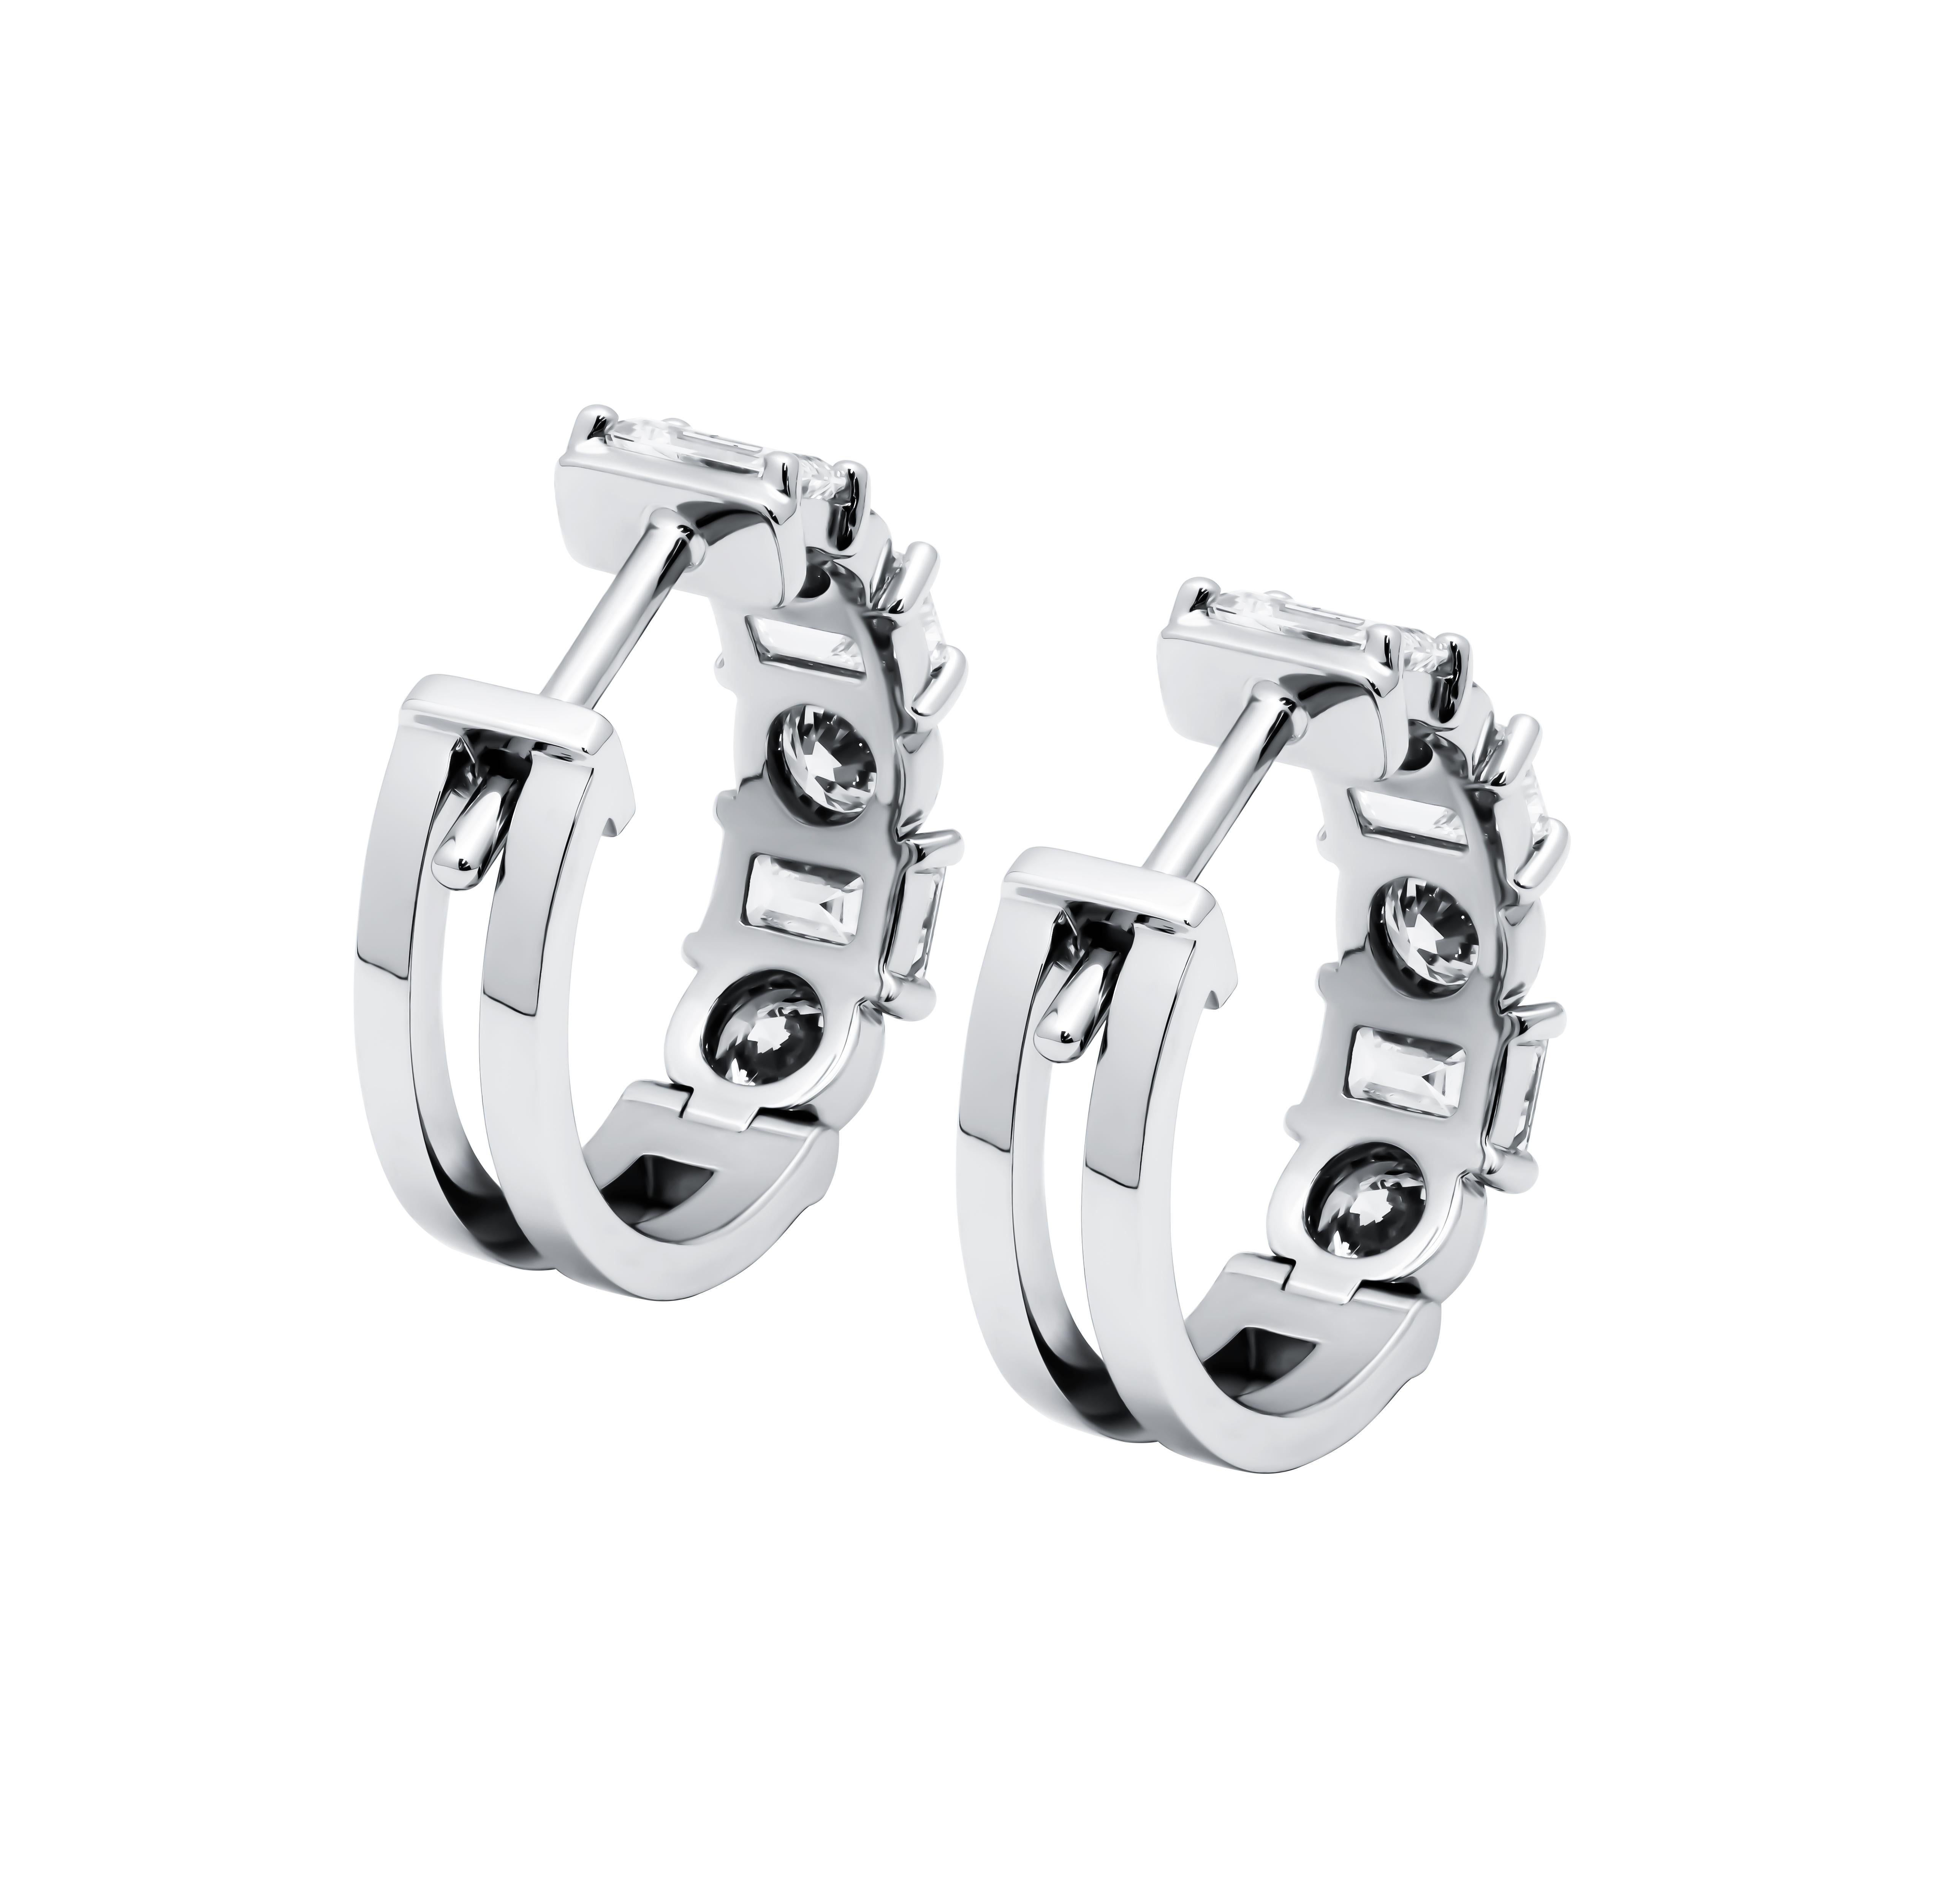 Discover the epitome of sophistication with our exquisite alternating diamond hoop earrings, expertly crafted in lustrous platinum. These enchanting earrings feature a stunning combination of emerald-cut and round diamonds, totaling 3.83 carats in